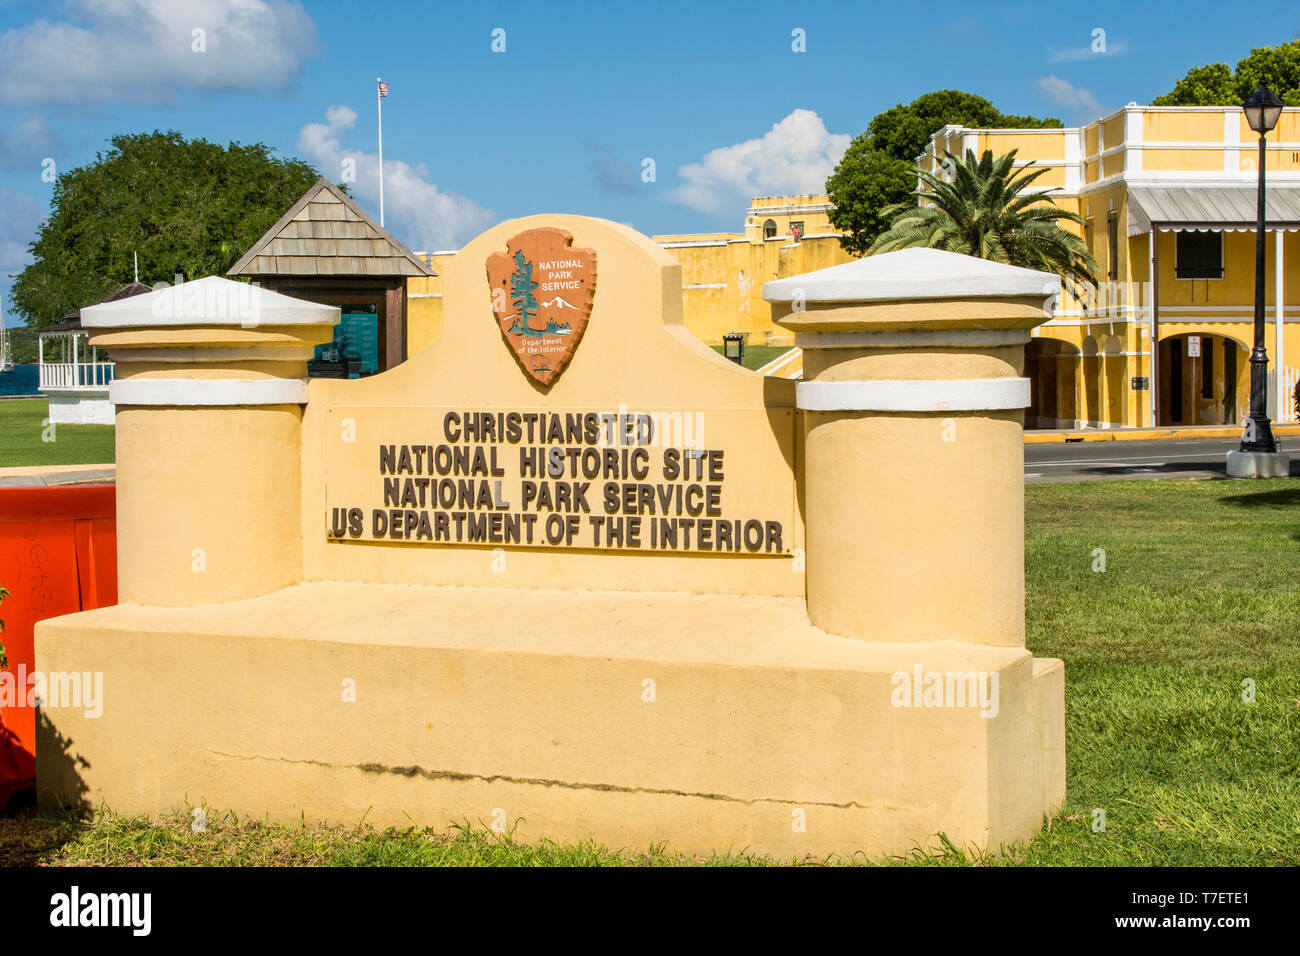 Christiansted National Historic Site, Christiansted, St. Croix, US Virgin Islands. Stock Photo